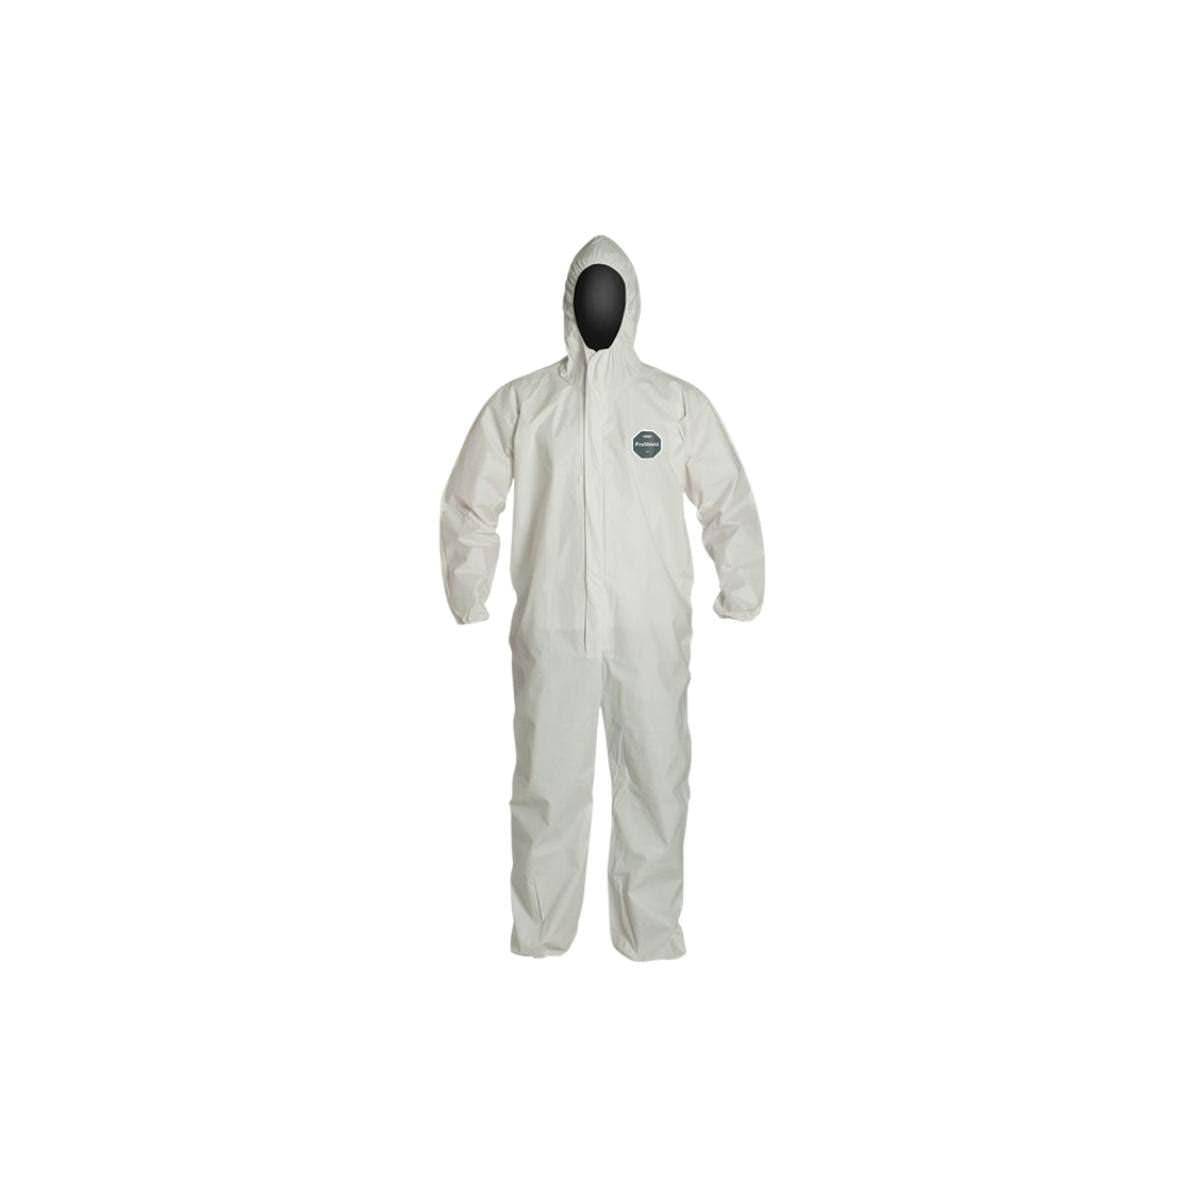 DuPont™ ProShield® 60 Coveralls 879755